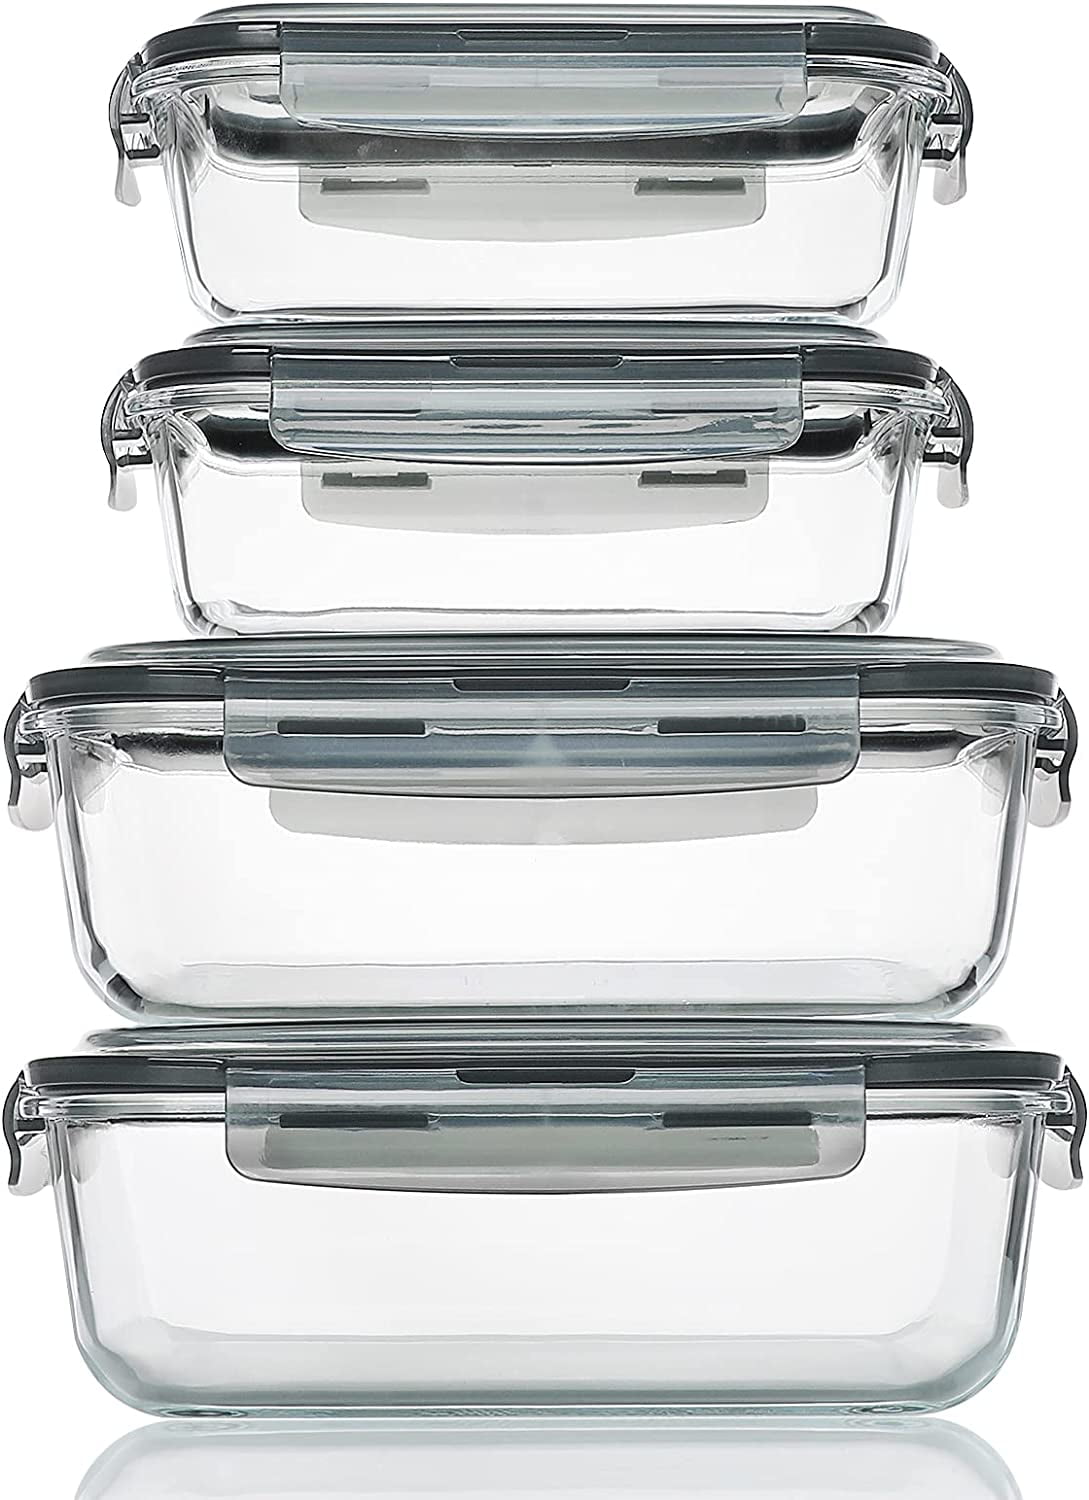 Large Glass Food Storage Containers with Locking Lids, 4-Pack